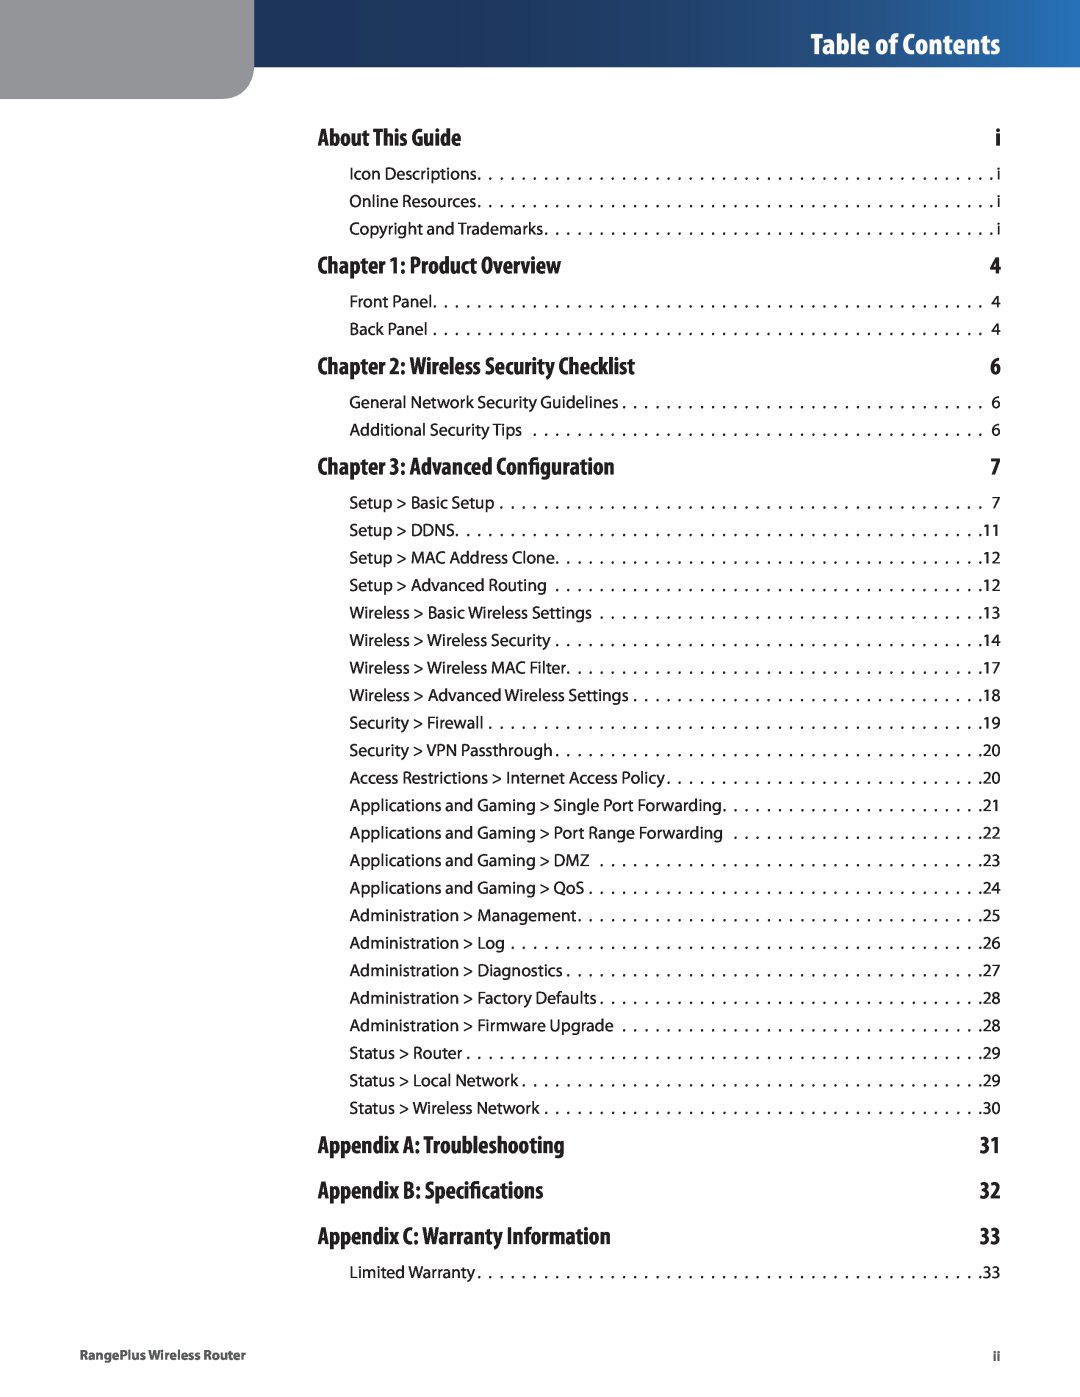 Cisco Systems WRT110 manual Table of Contents, About This Guide, Product Overview, Advanced Configuration 